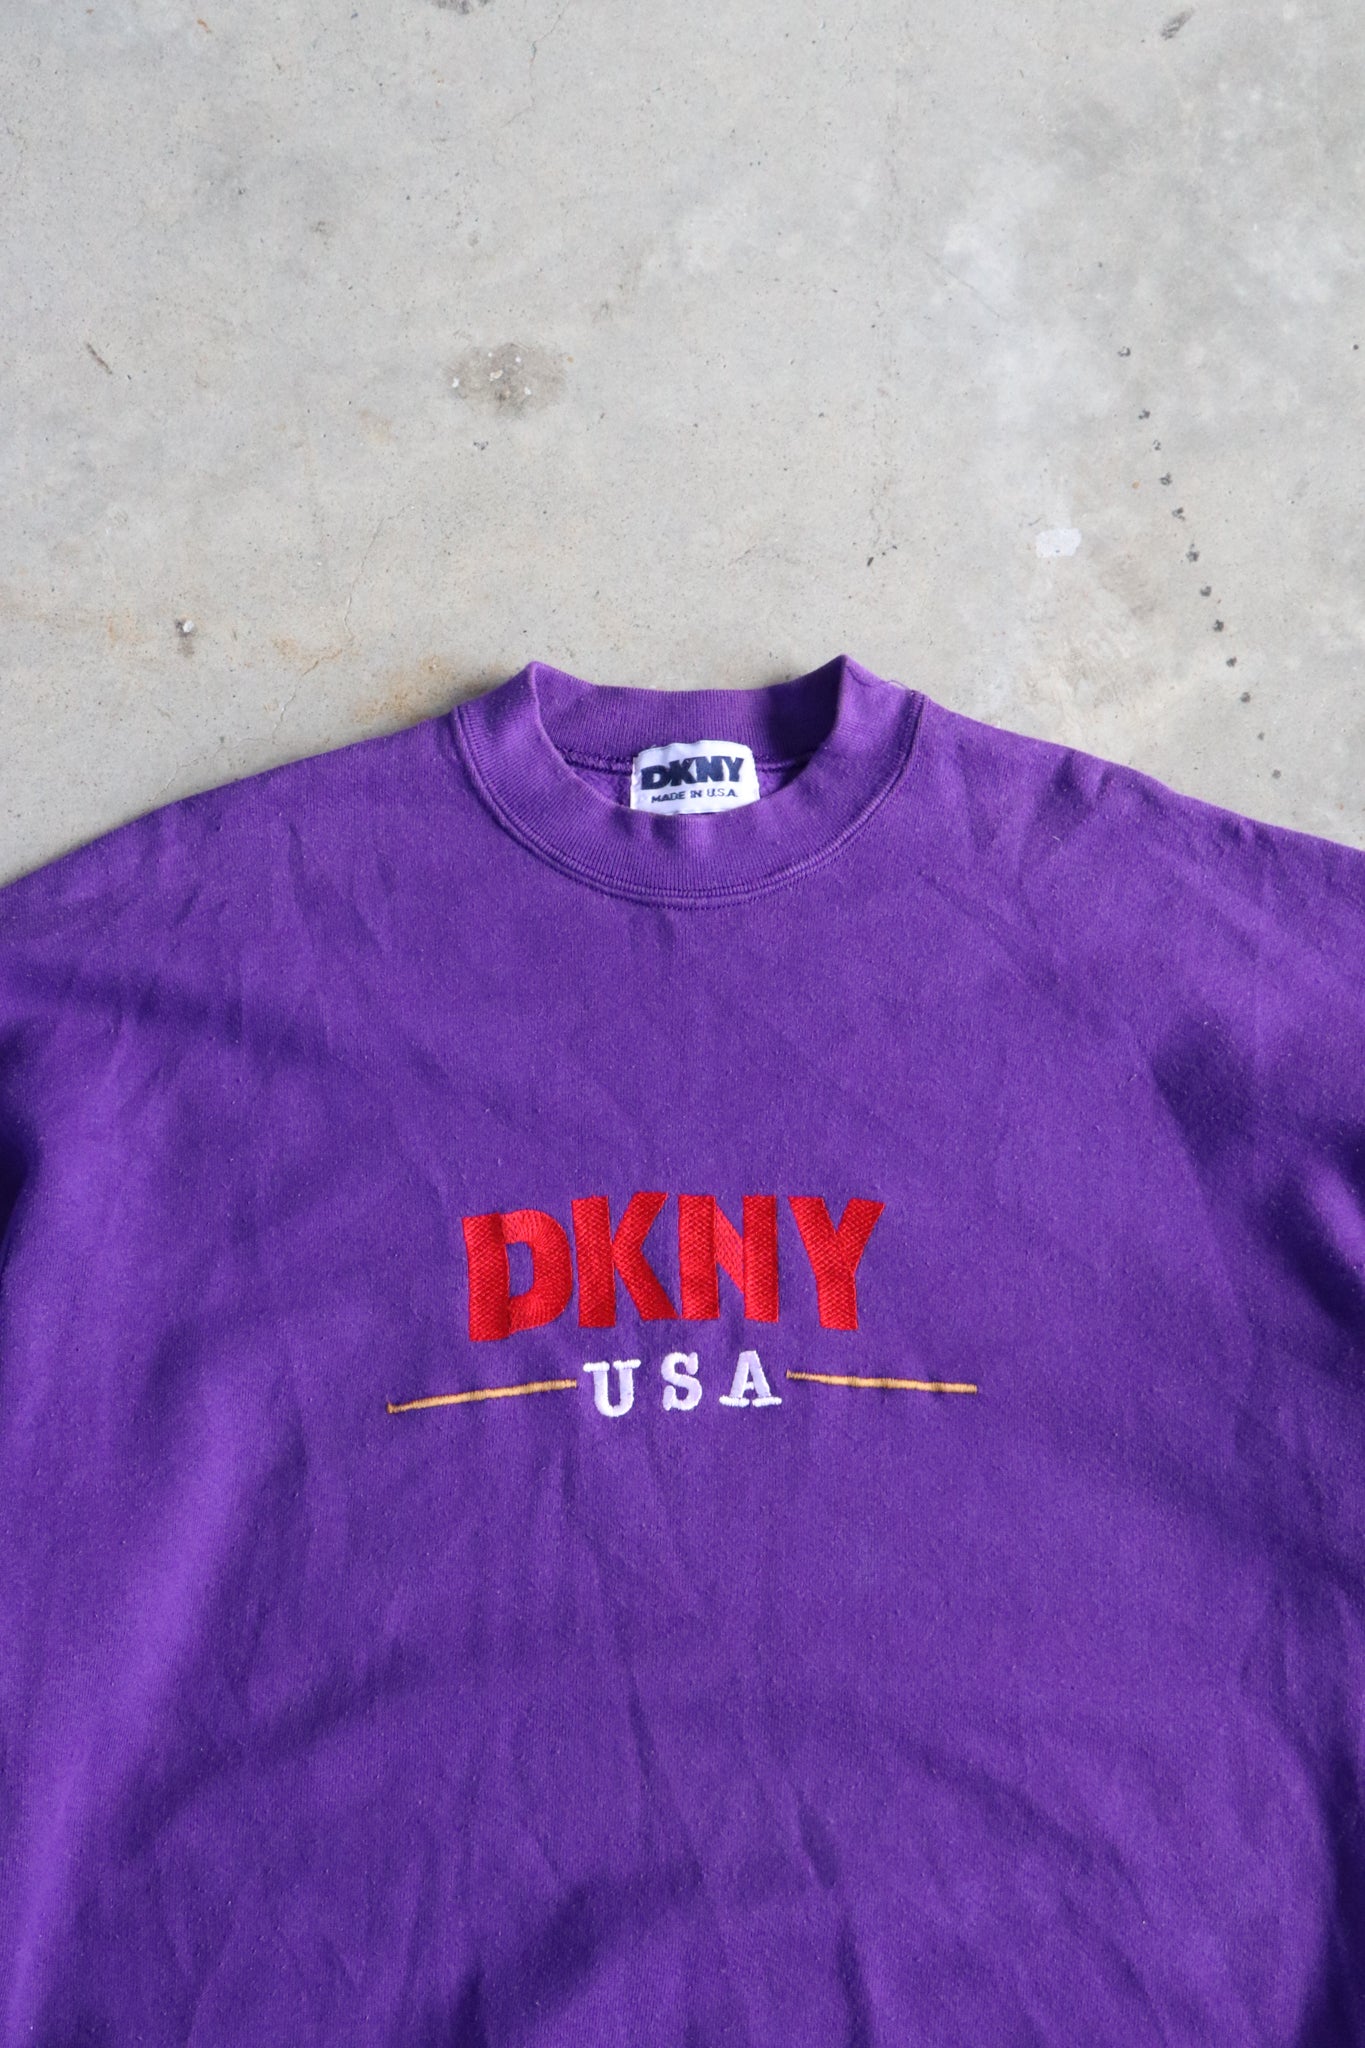 Vintage DKNY USA Embroided Sweater XL